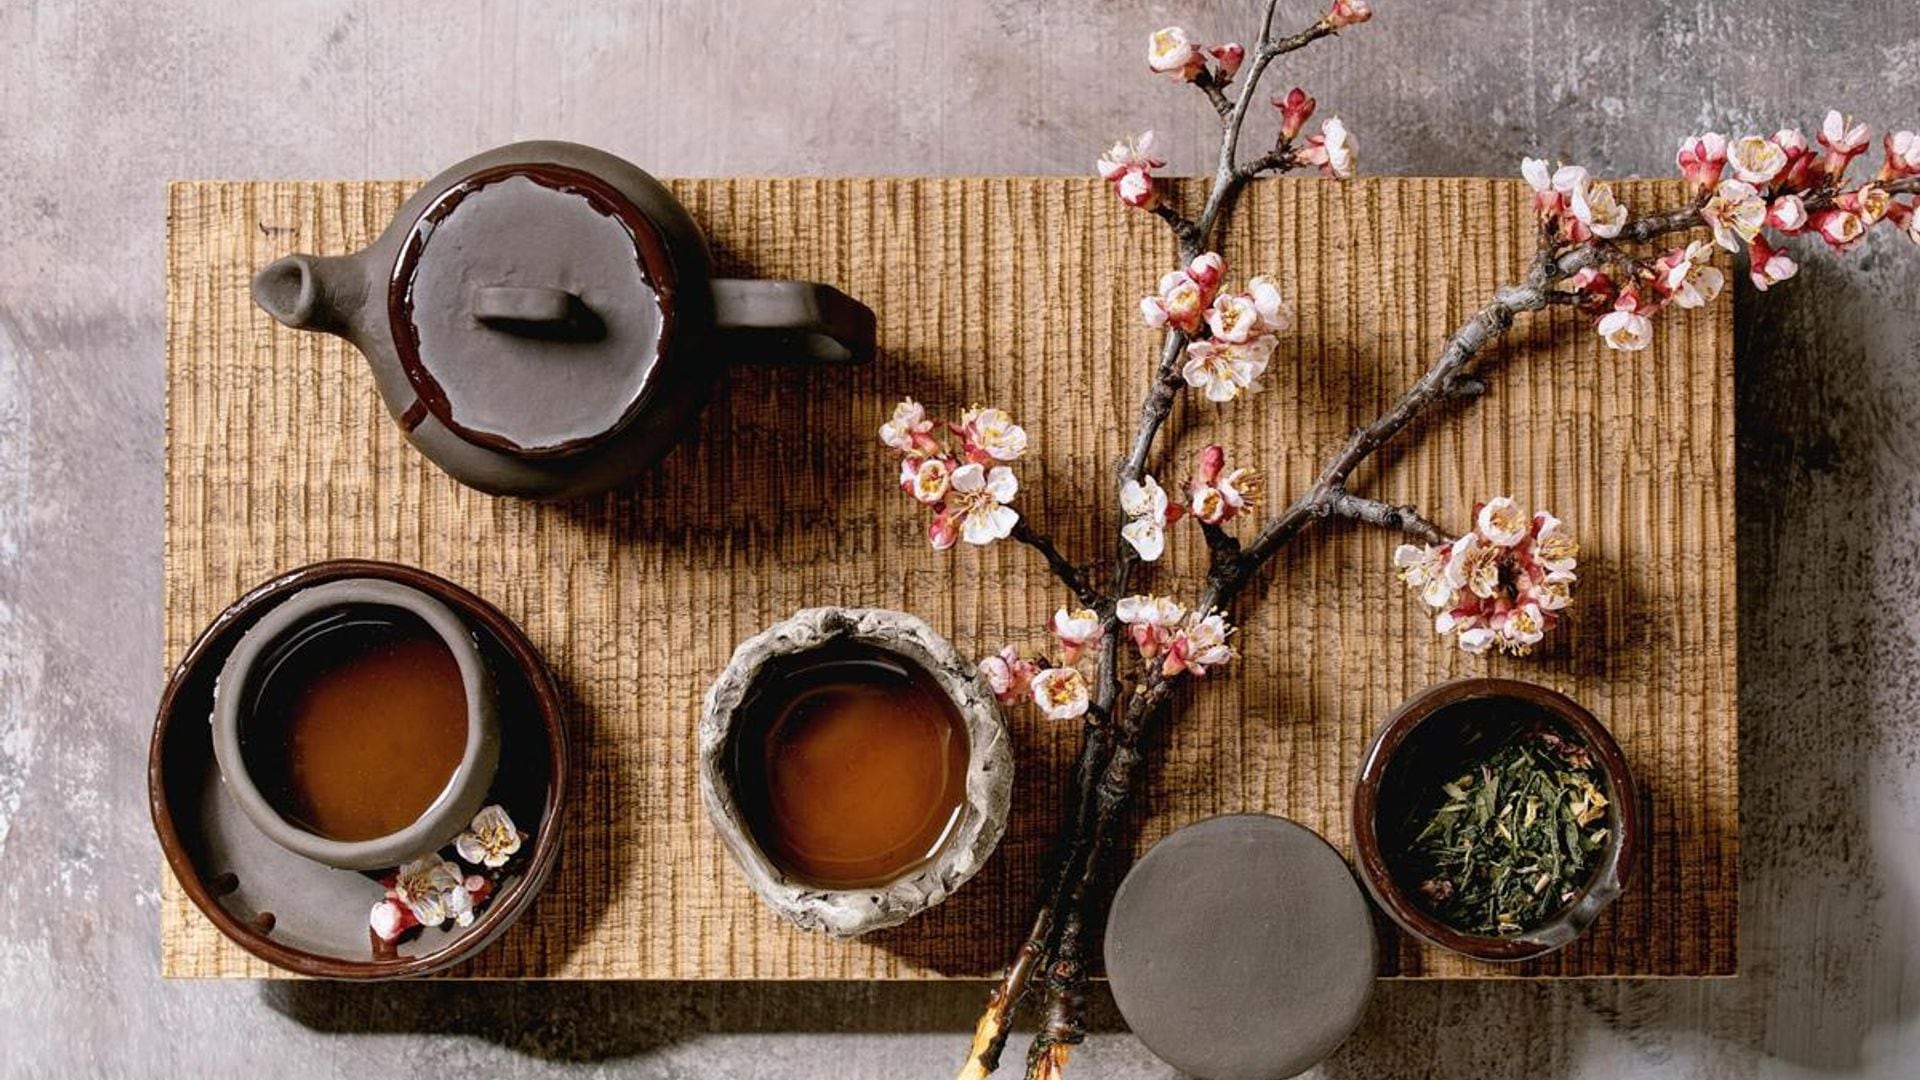 Tea drinking wabi sabi japanese style dark clay cups and teapot on wooden tea table with blooming cherry branches. Grey texture concrete background. Flat lay. space